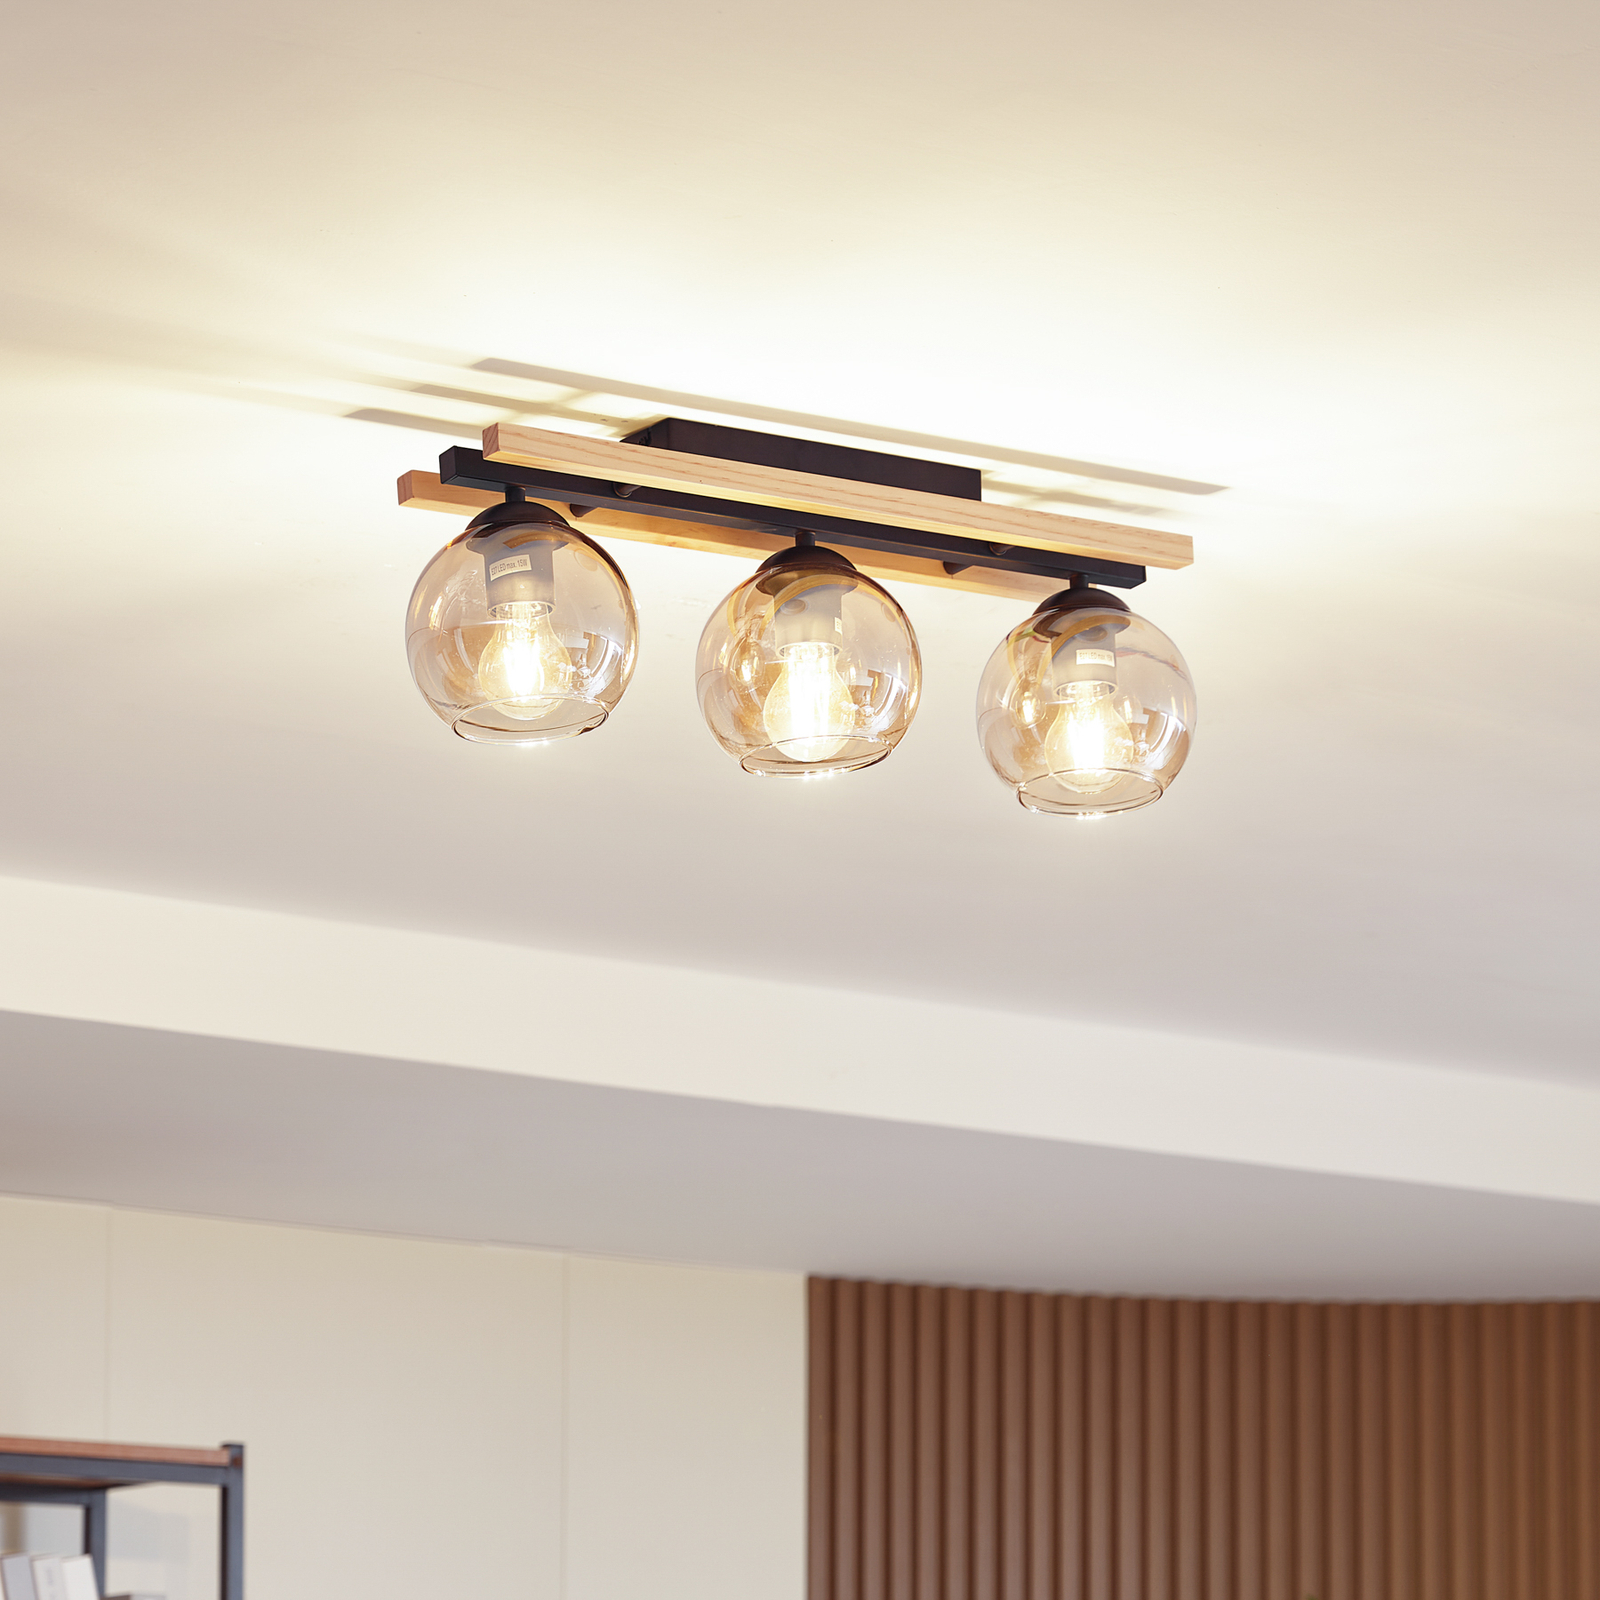 Lindby Maite ceiling light with glass shades 3-bulb.